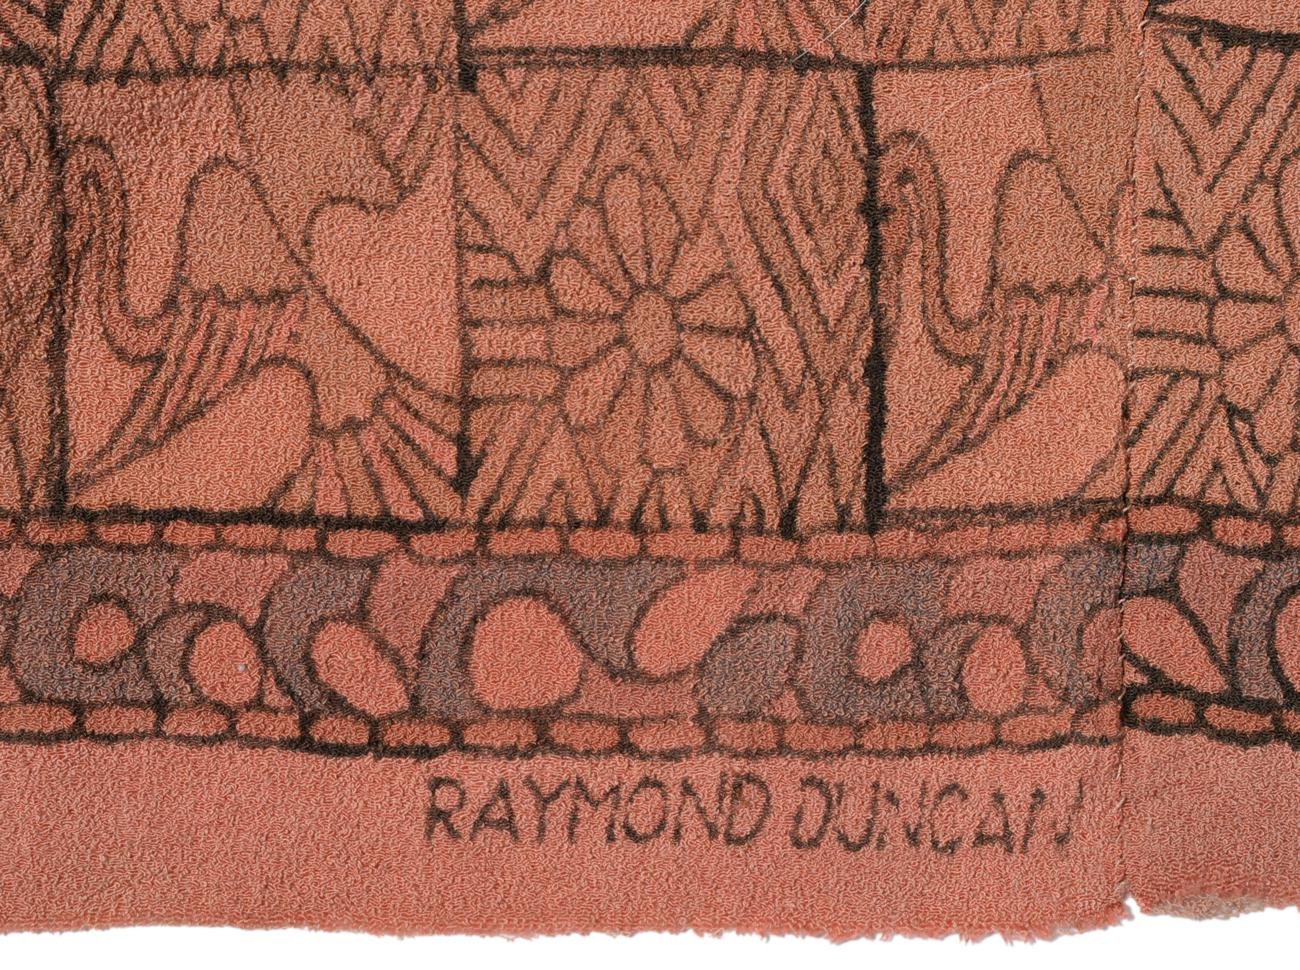 Circa 1920's Crepe Tunic Top by Raymond Duncan, on a pink crepe with a notch neck and back, - Image 2 of 2